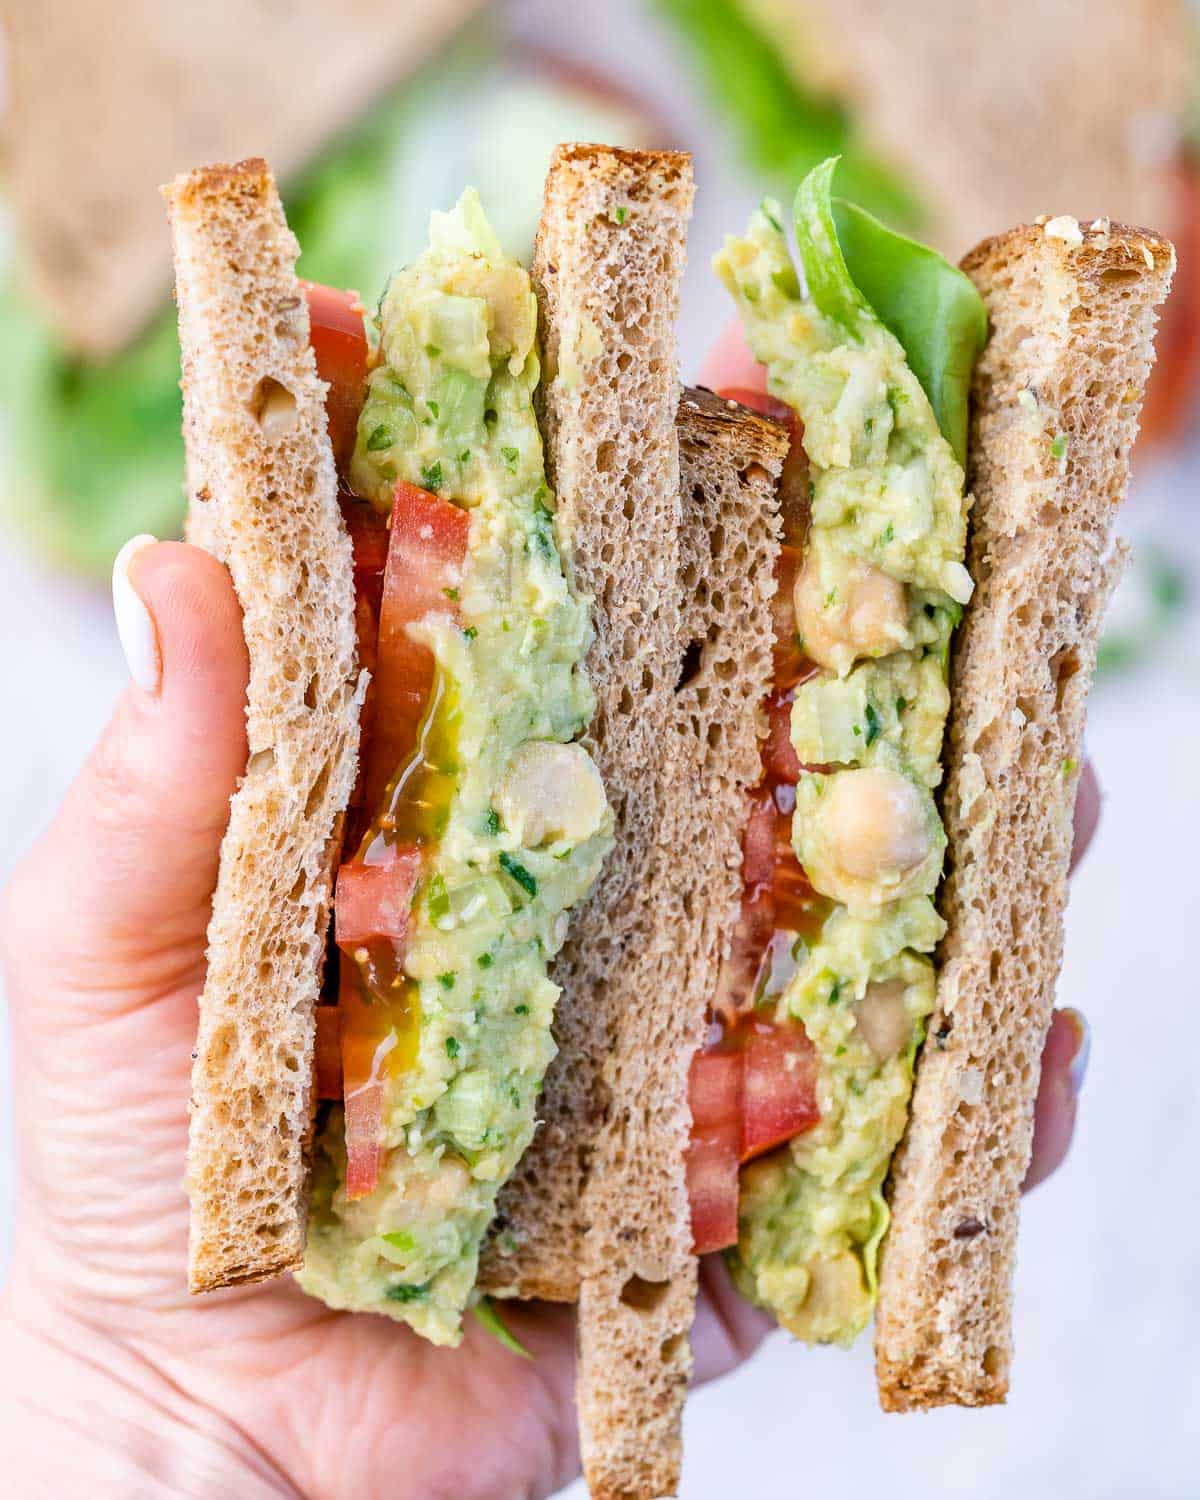 front view of avocado chickpea sandwich with lettuce and tomatoes